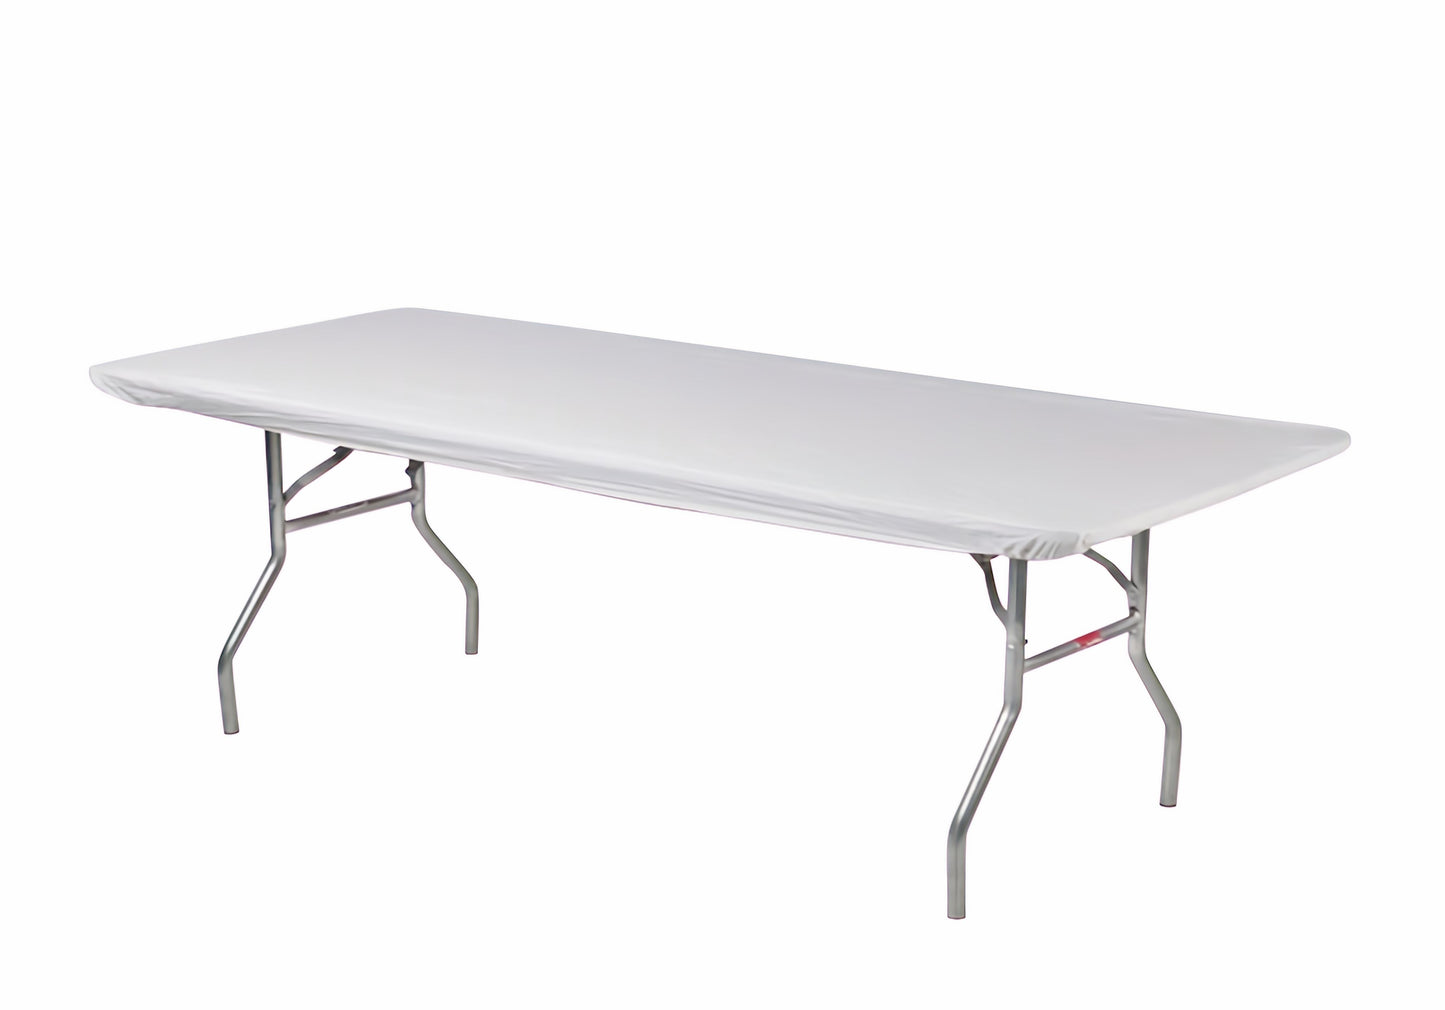 Short Banquet Fitted Plastic Table Covers